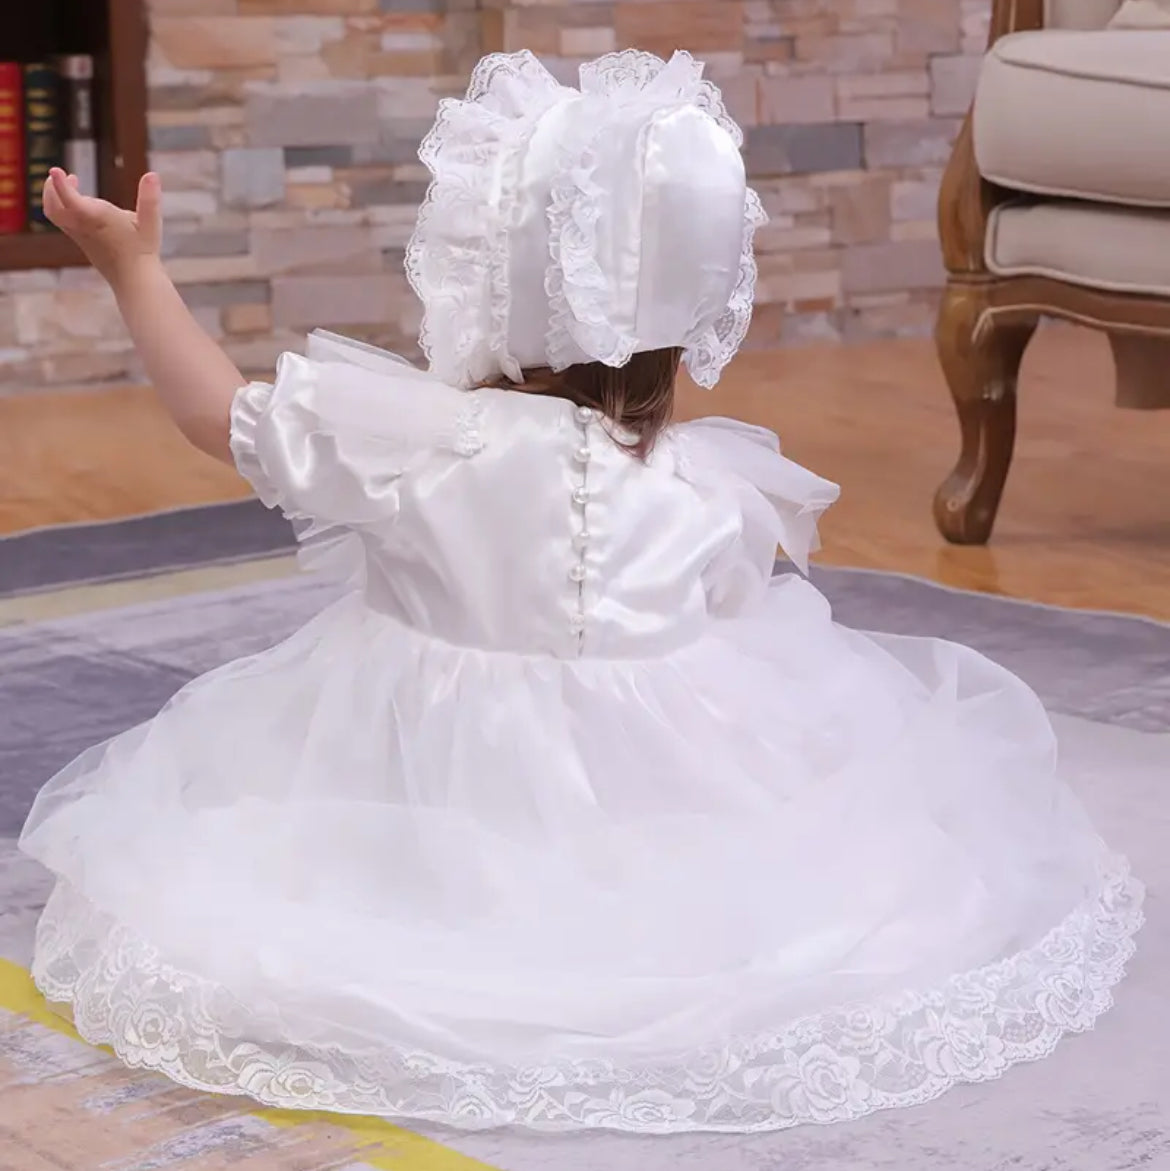 Baby Dedication, Pure White Baby Dress With Bonnet